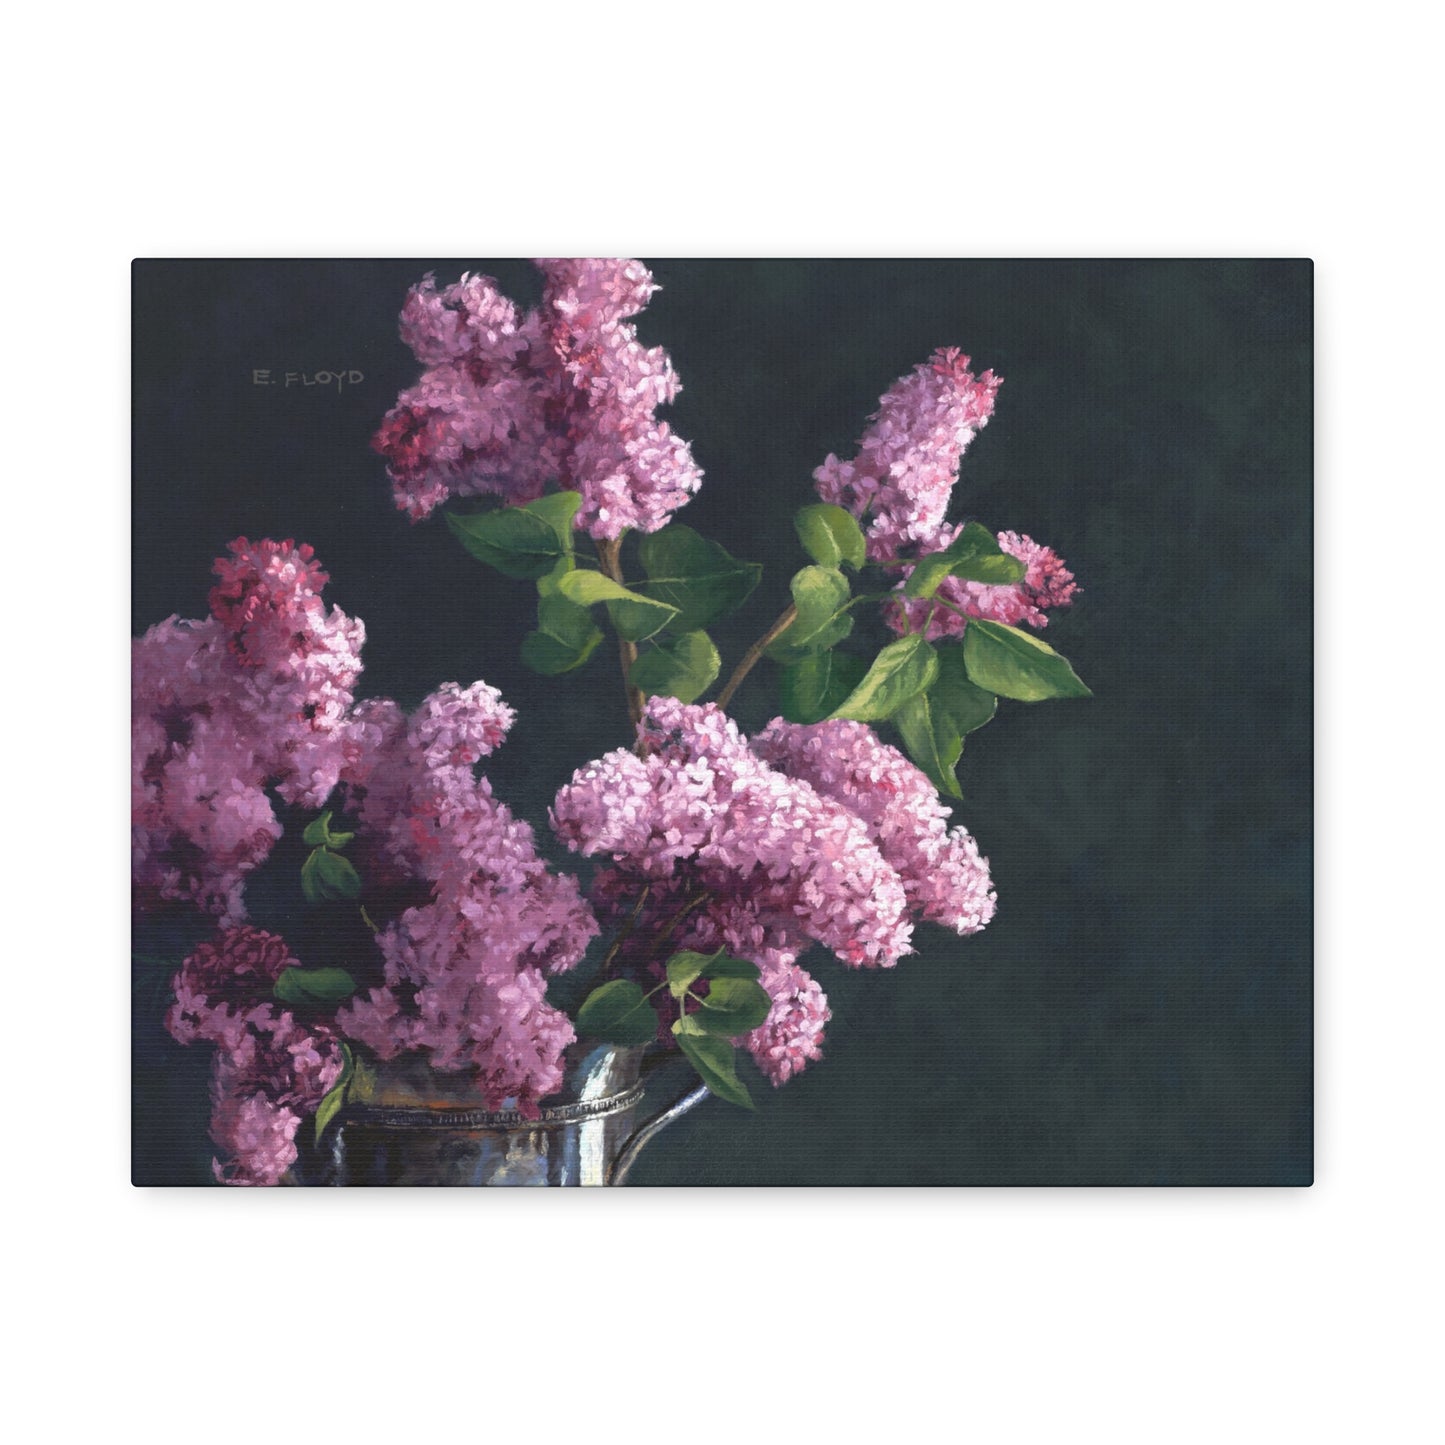 Lilacs in Tarnished Silver, Floral Art Canvas Print, Stretched 1.25" Deep